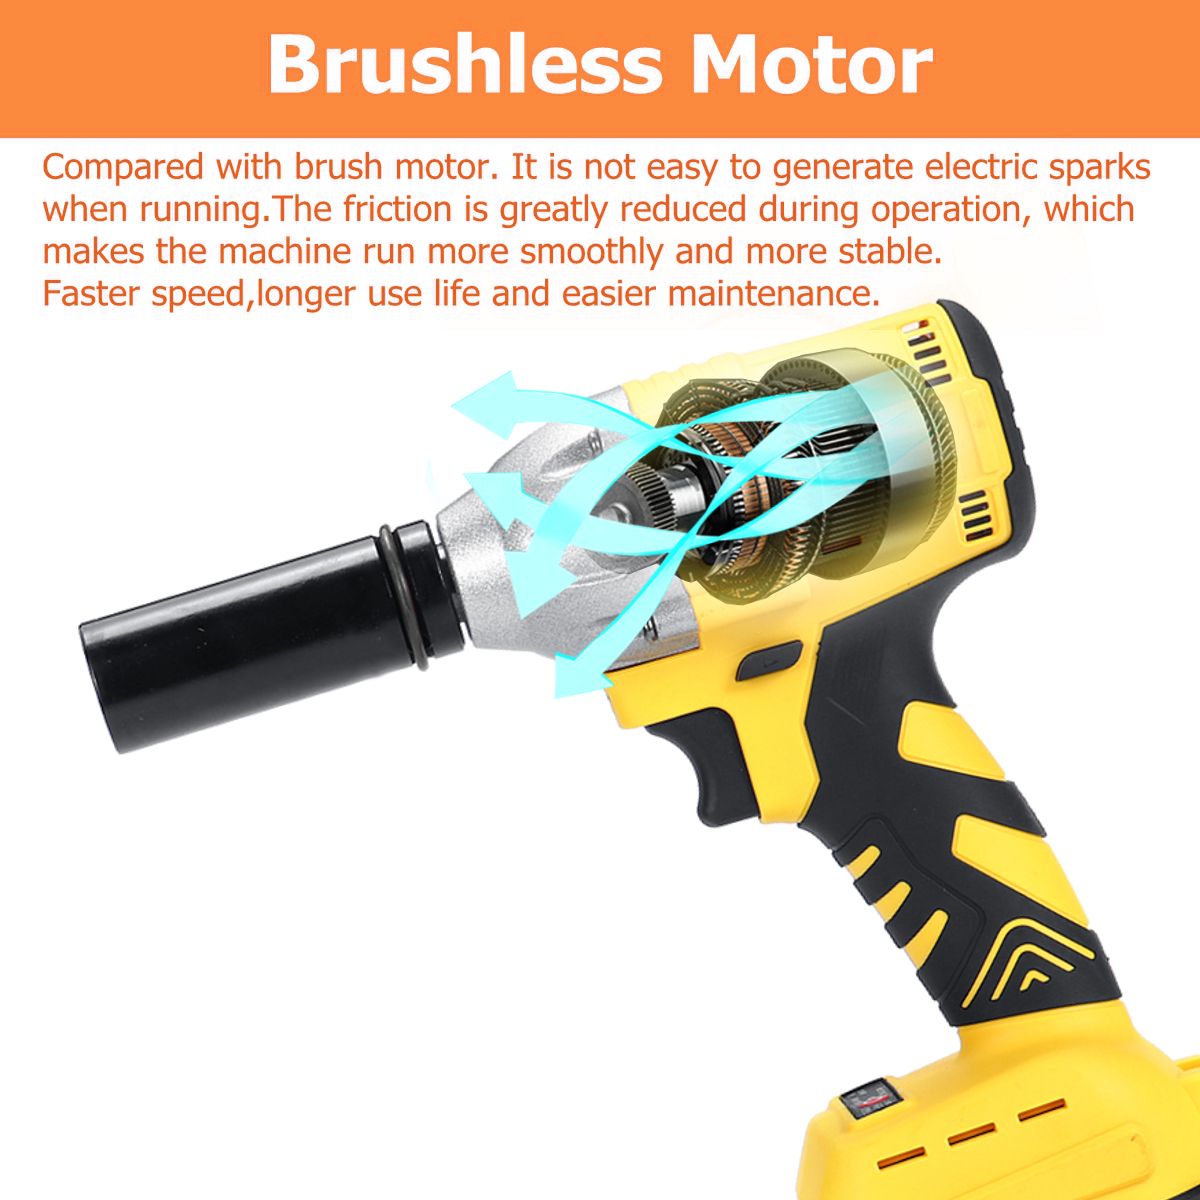 12-Cordless-Brushless-Impact-Wrench-Brushless-Motor-Power-Driver-Electric-Wrench-with-2-Battery-1807111-5